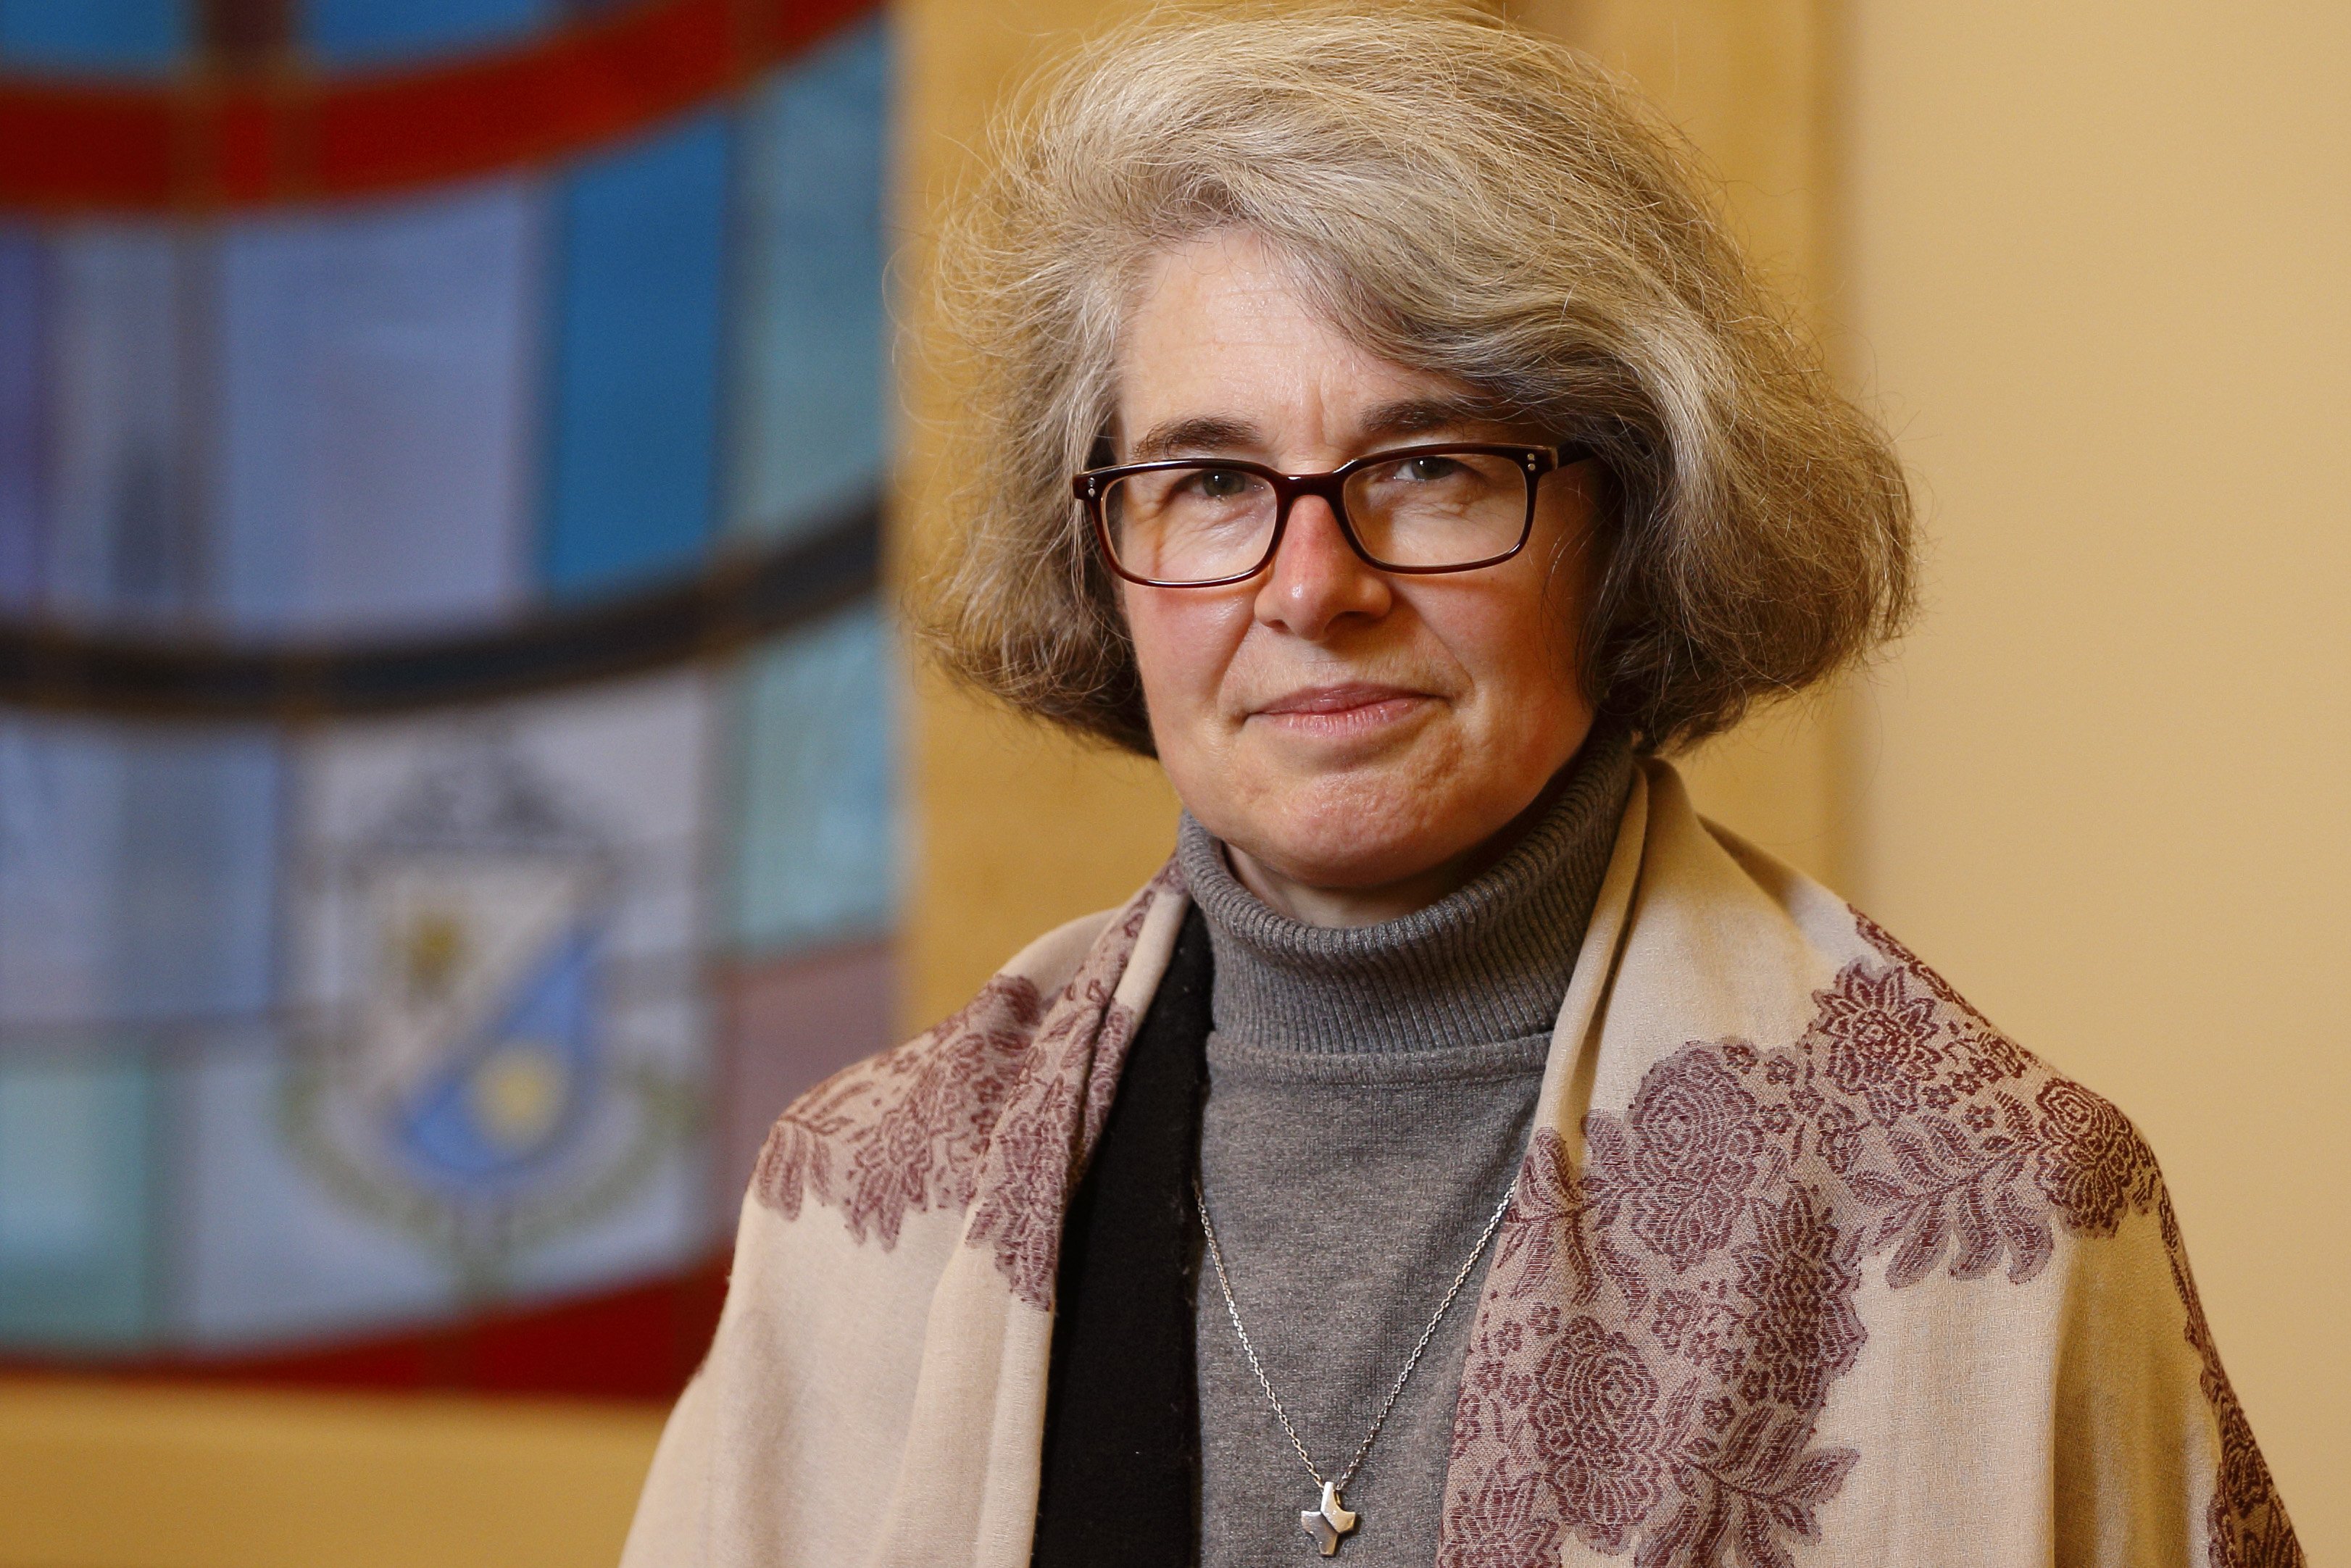 Xavière Missionary Sister Nathalie Becquart, undersecretary of the Synod of Bishops, is pictured in the chapel at her office at the Vatican Jan. 5, 2021. (CNS photo/Paul Haring)